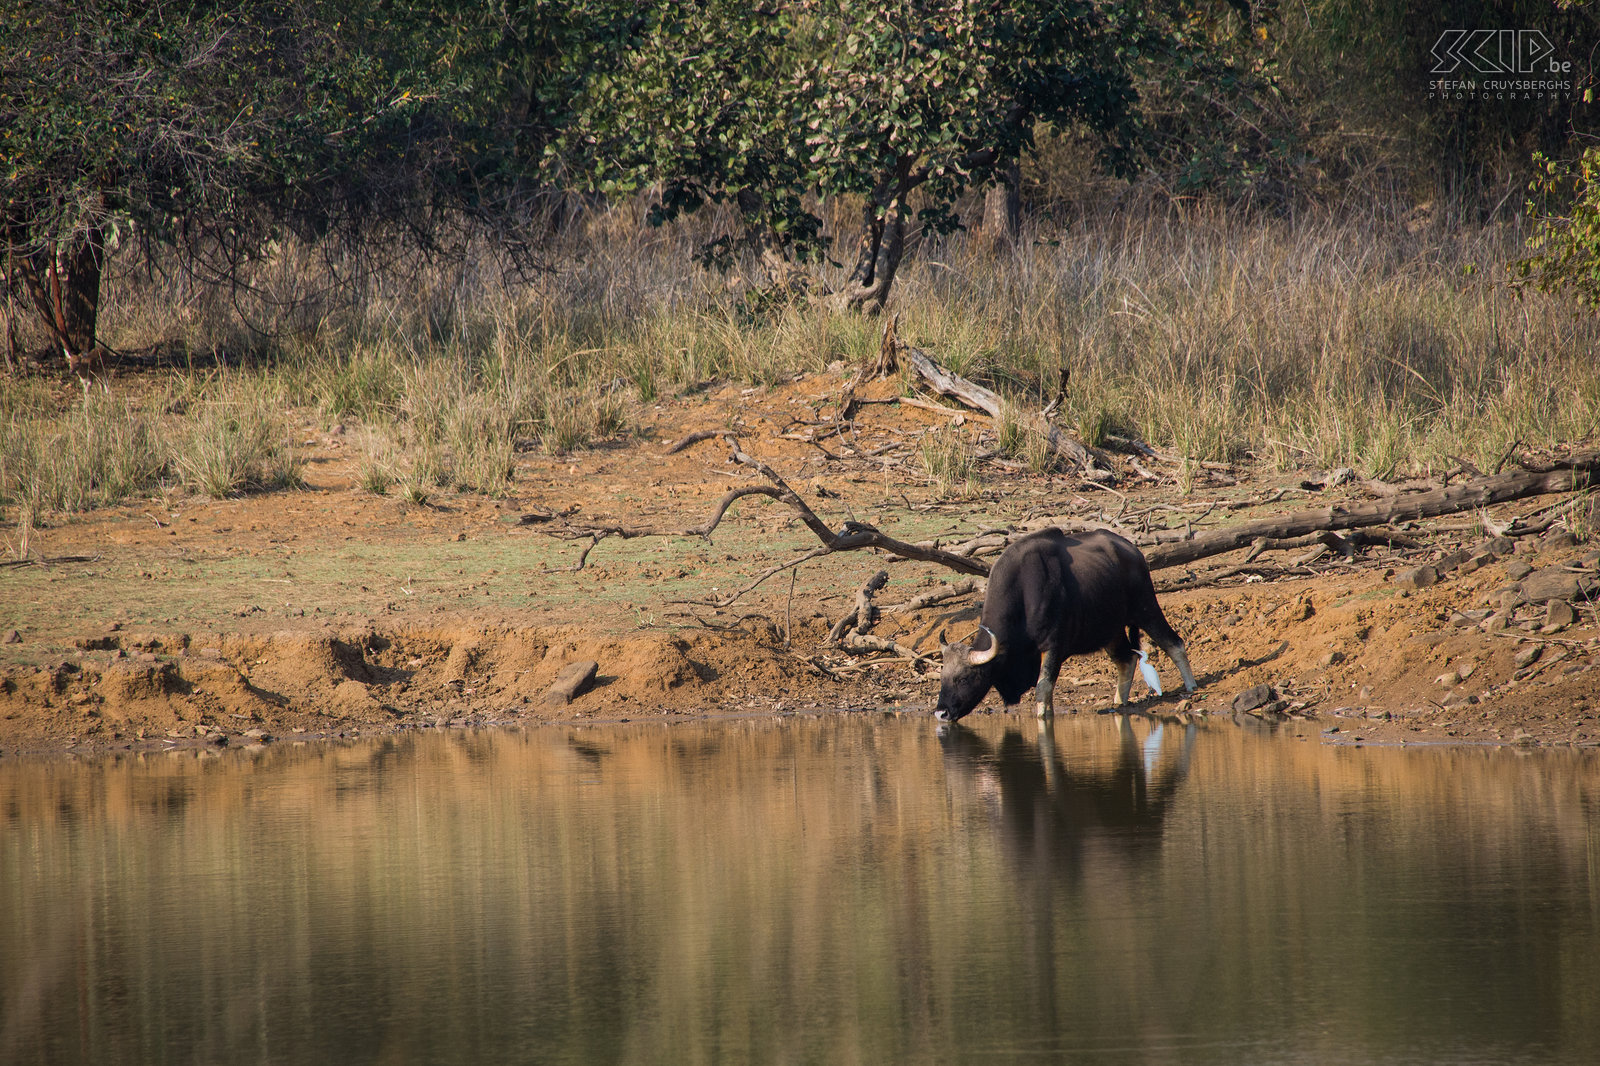 Tadoba - Gaur The gaur, also called Indian bison, is the largest bovine living in Asia. Stefan Cruysberghs